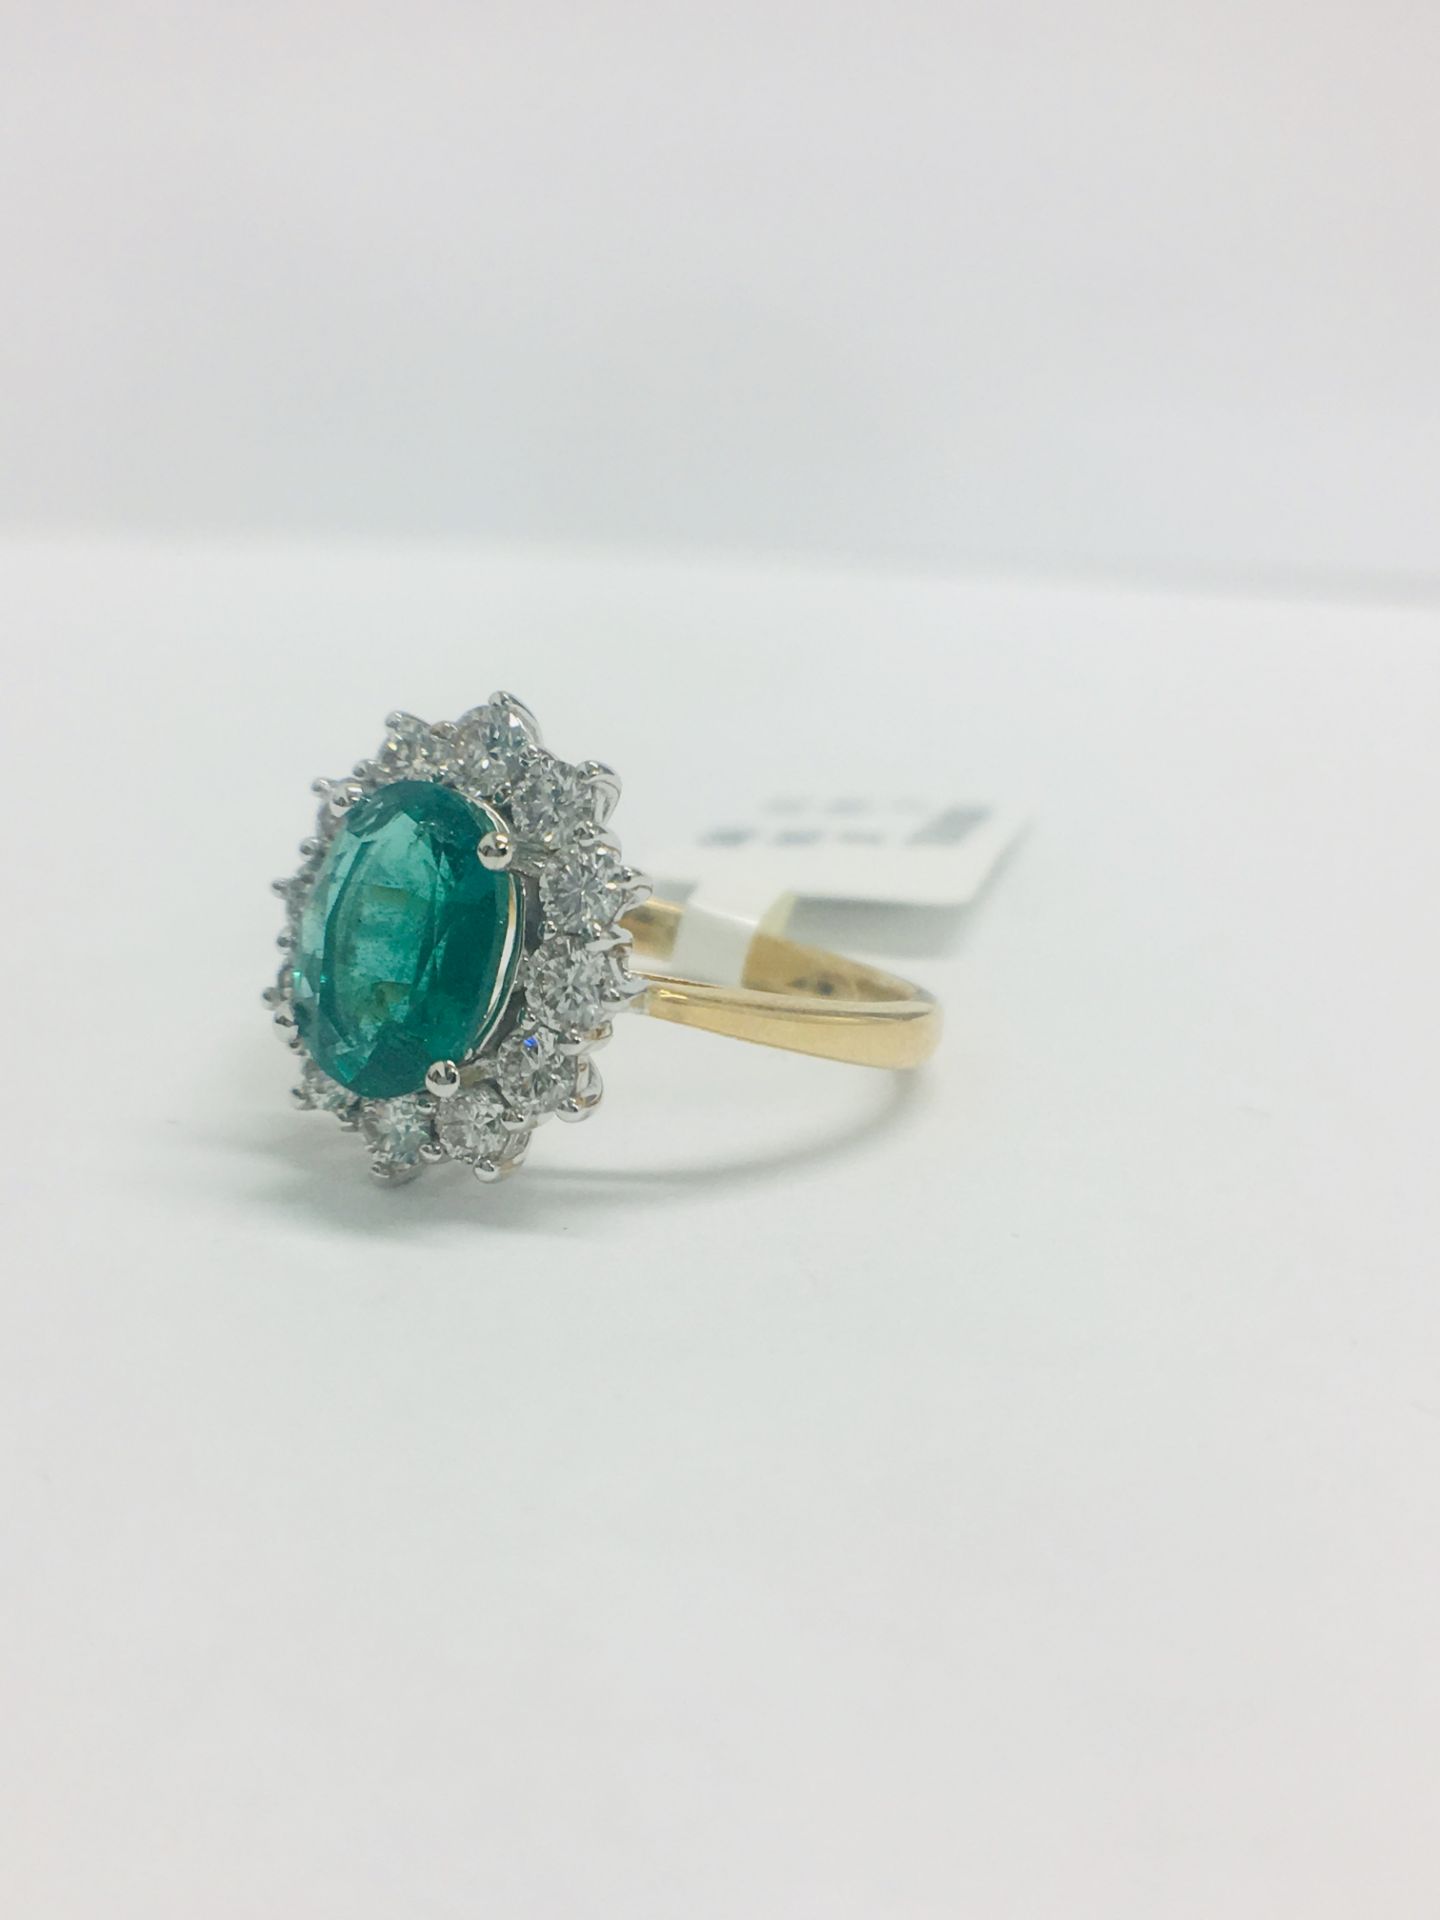 18ct Emerald And Diamond Cluster Ring - Image 2 of 10